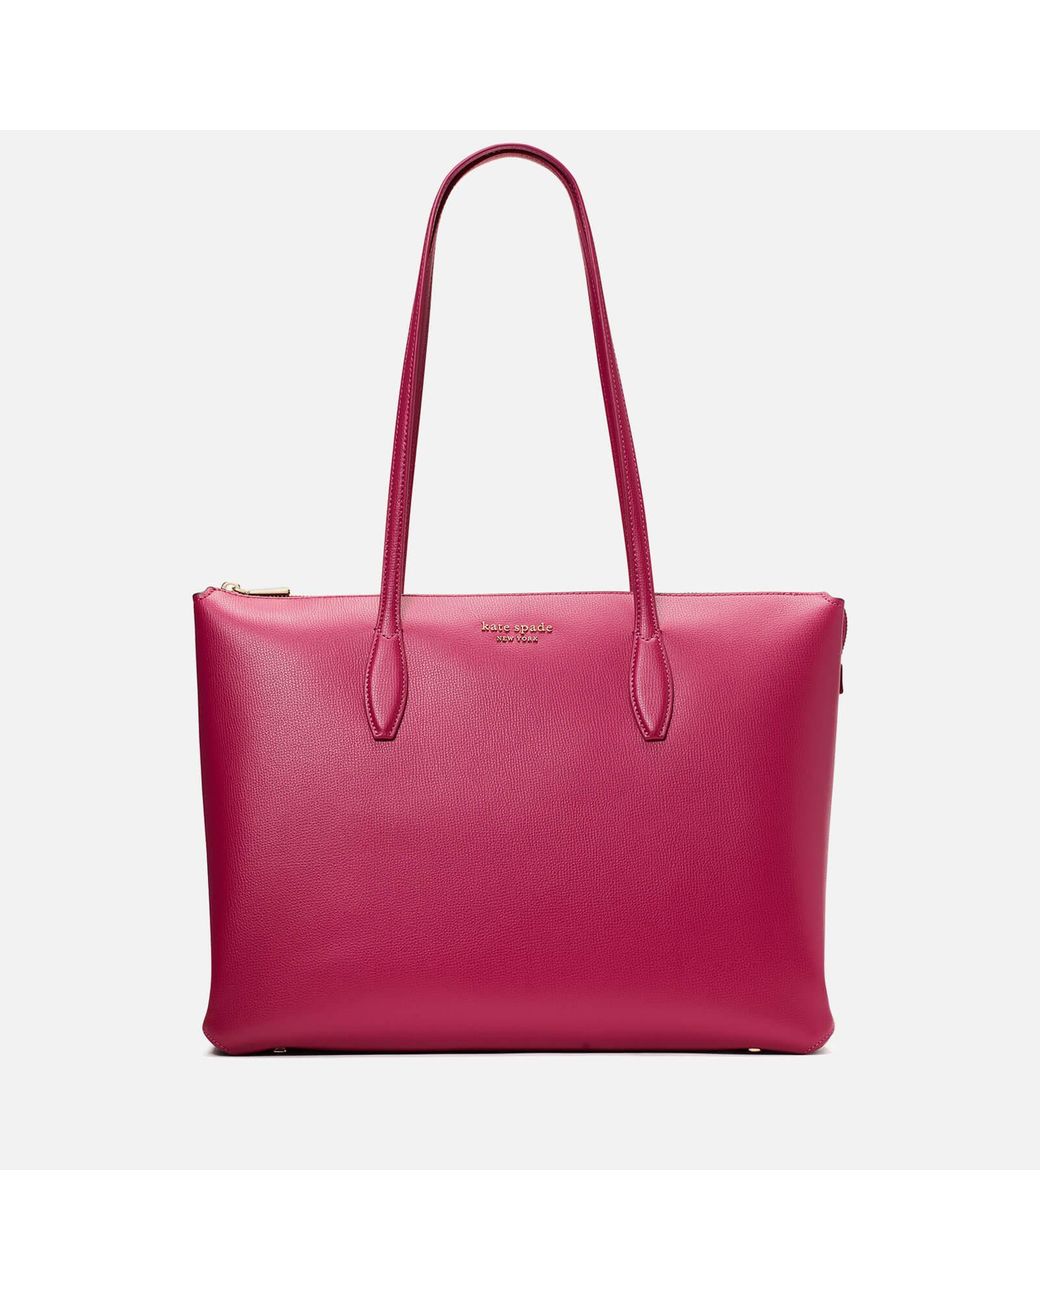 Kate Spade All Day Large Leather Tote Bag in Pink | Lyst UK